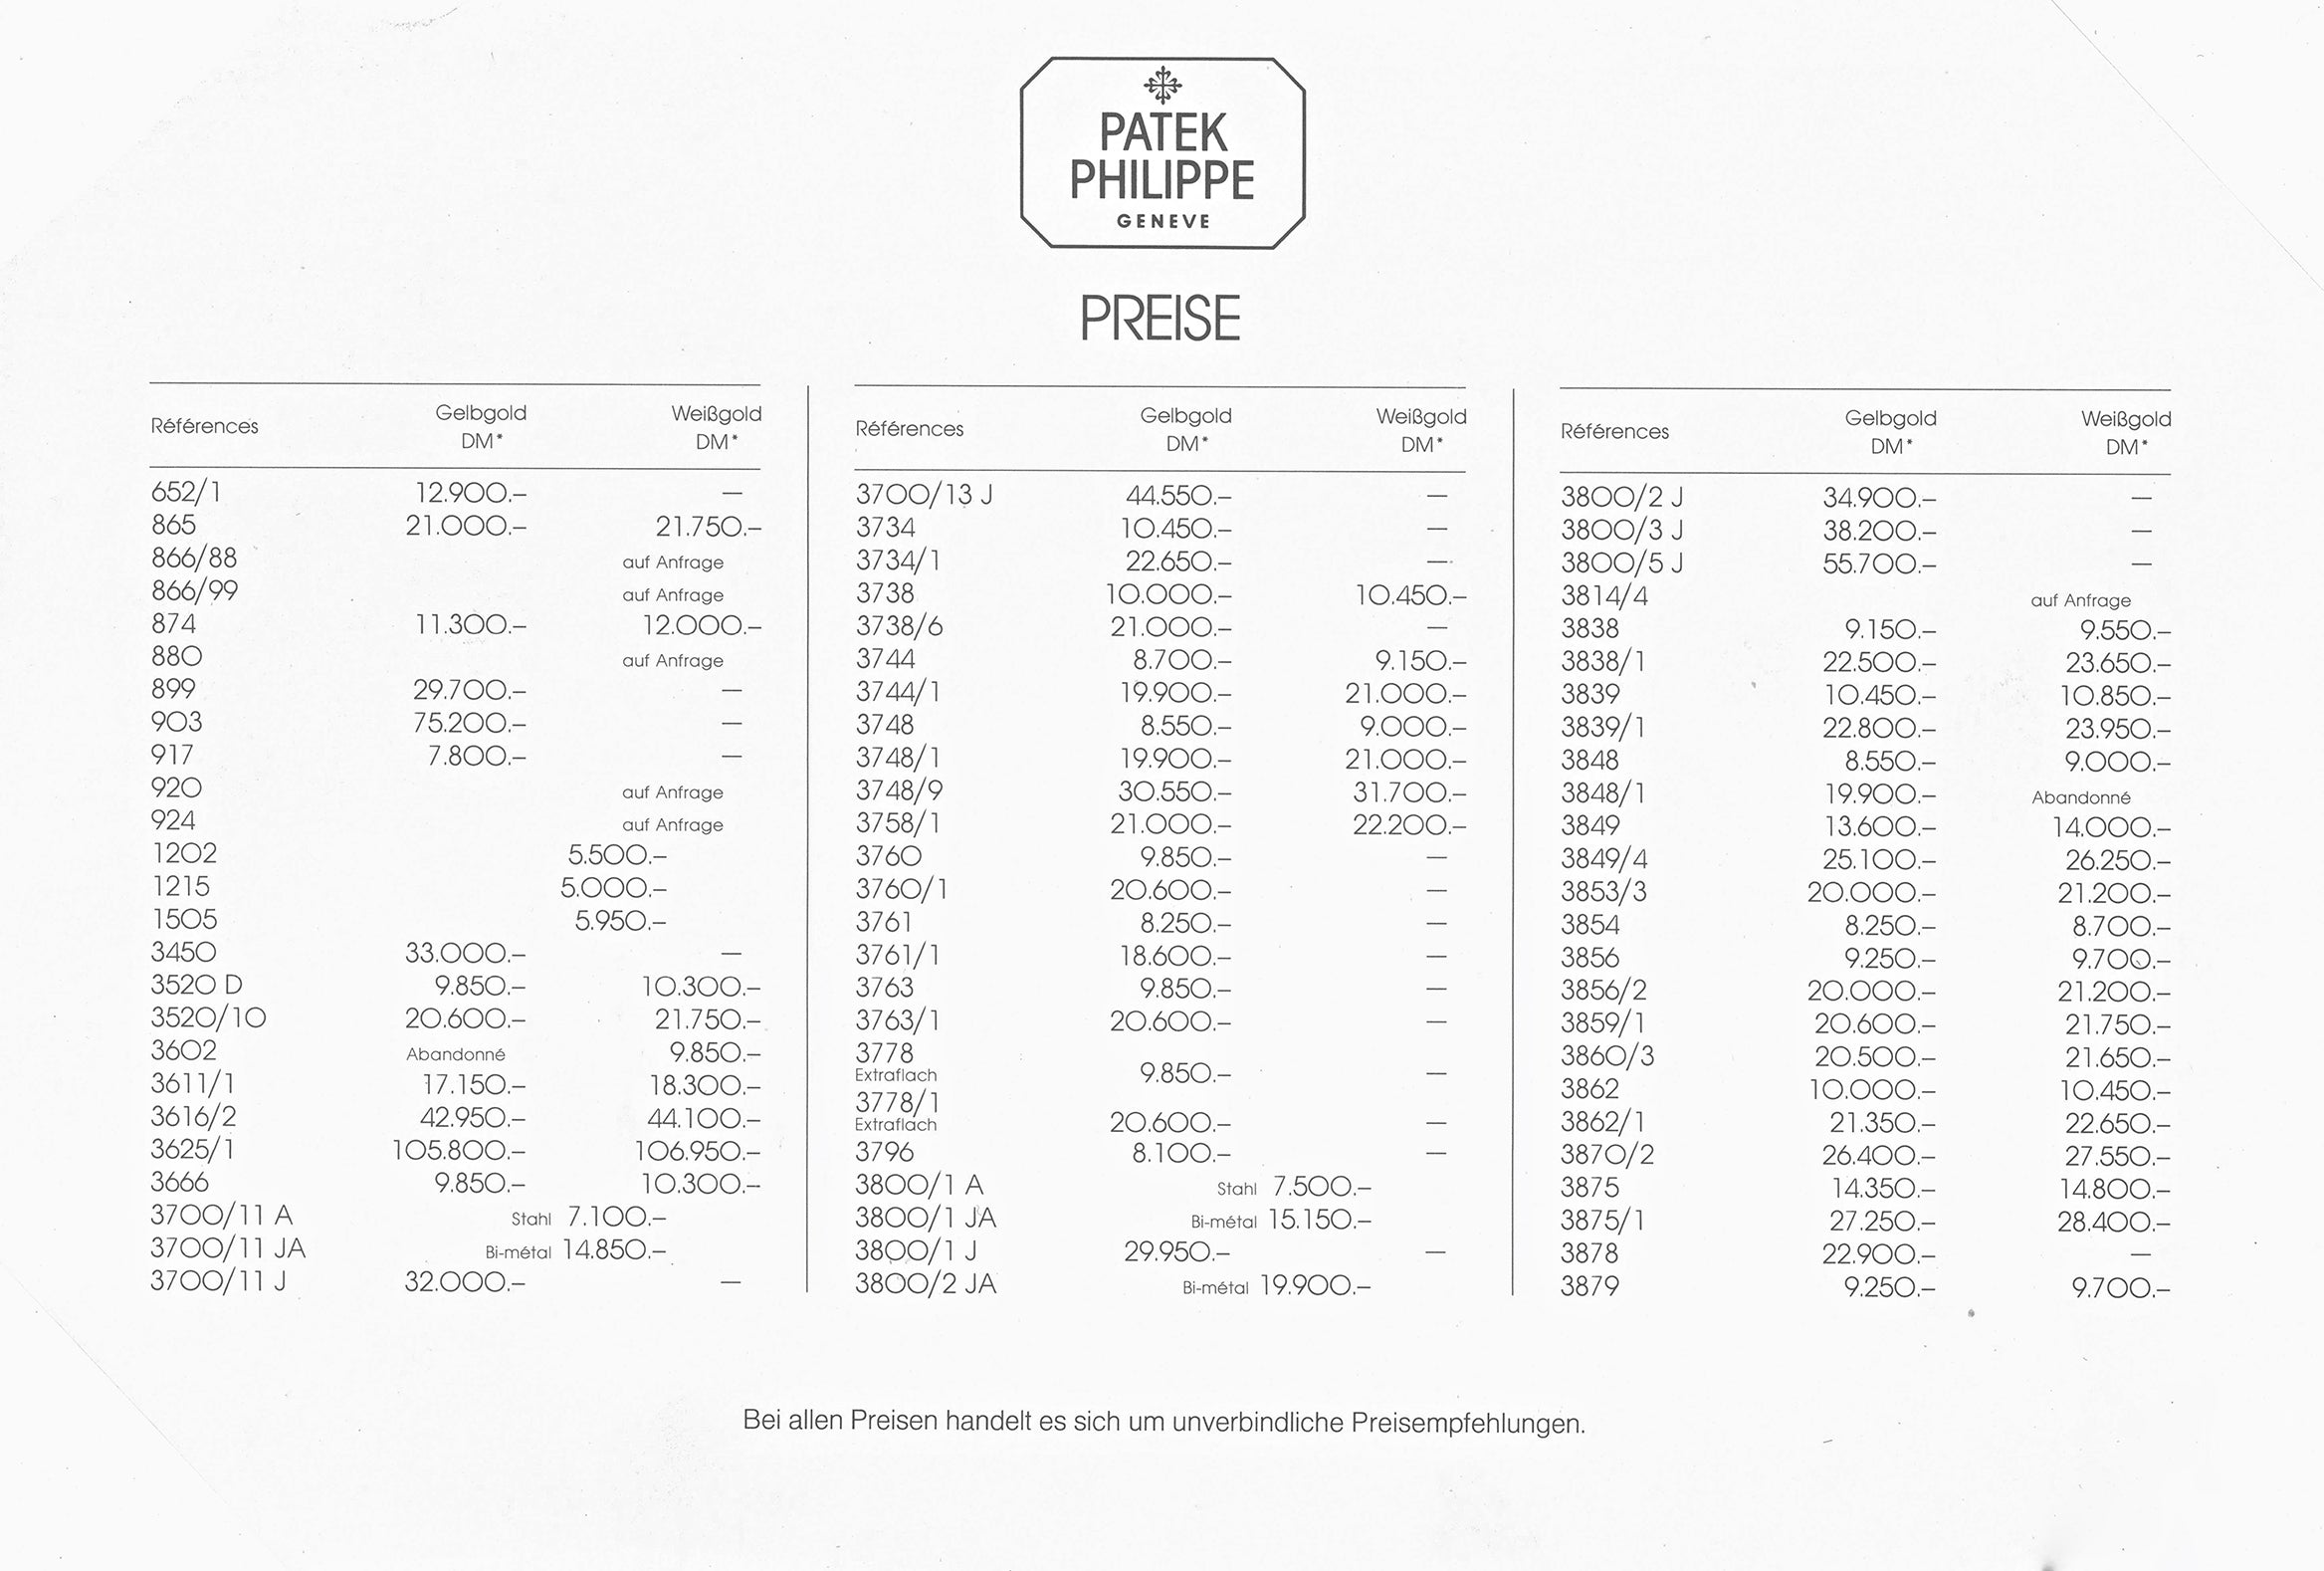 Patek Philippe price list from October 1982 from A Collected Man London